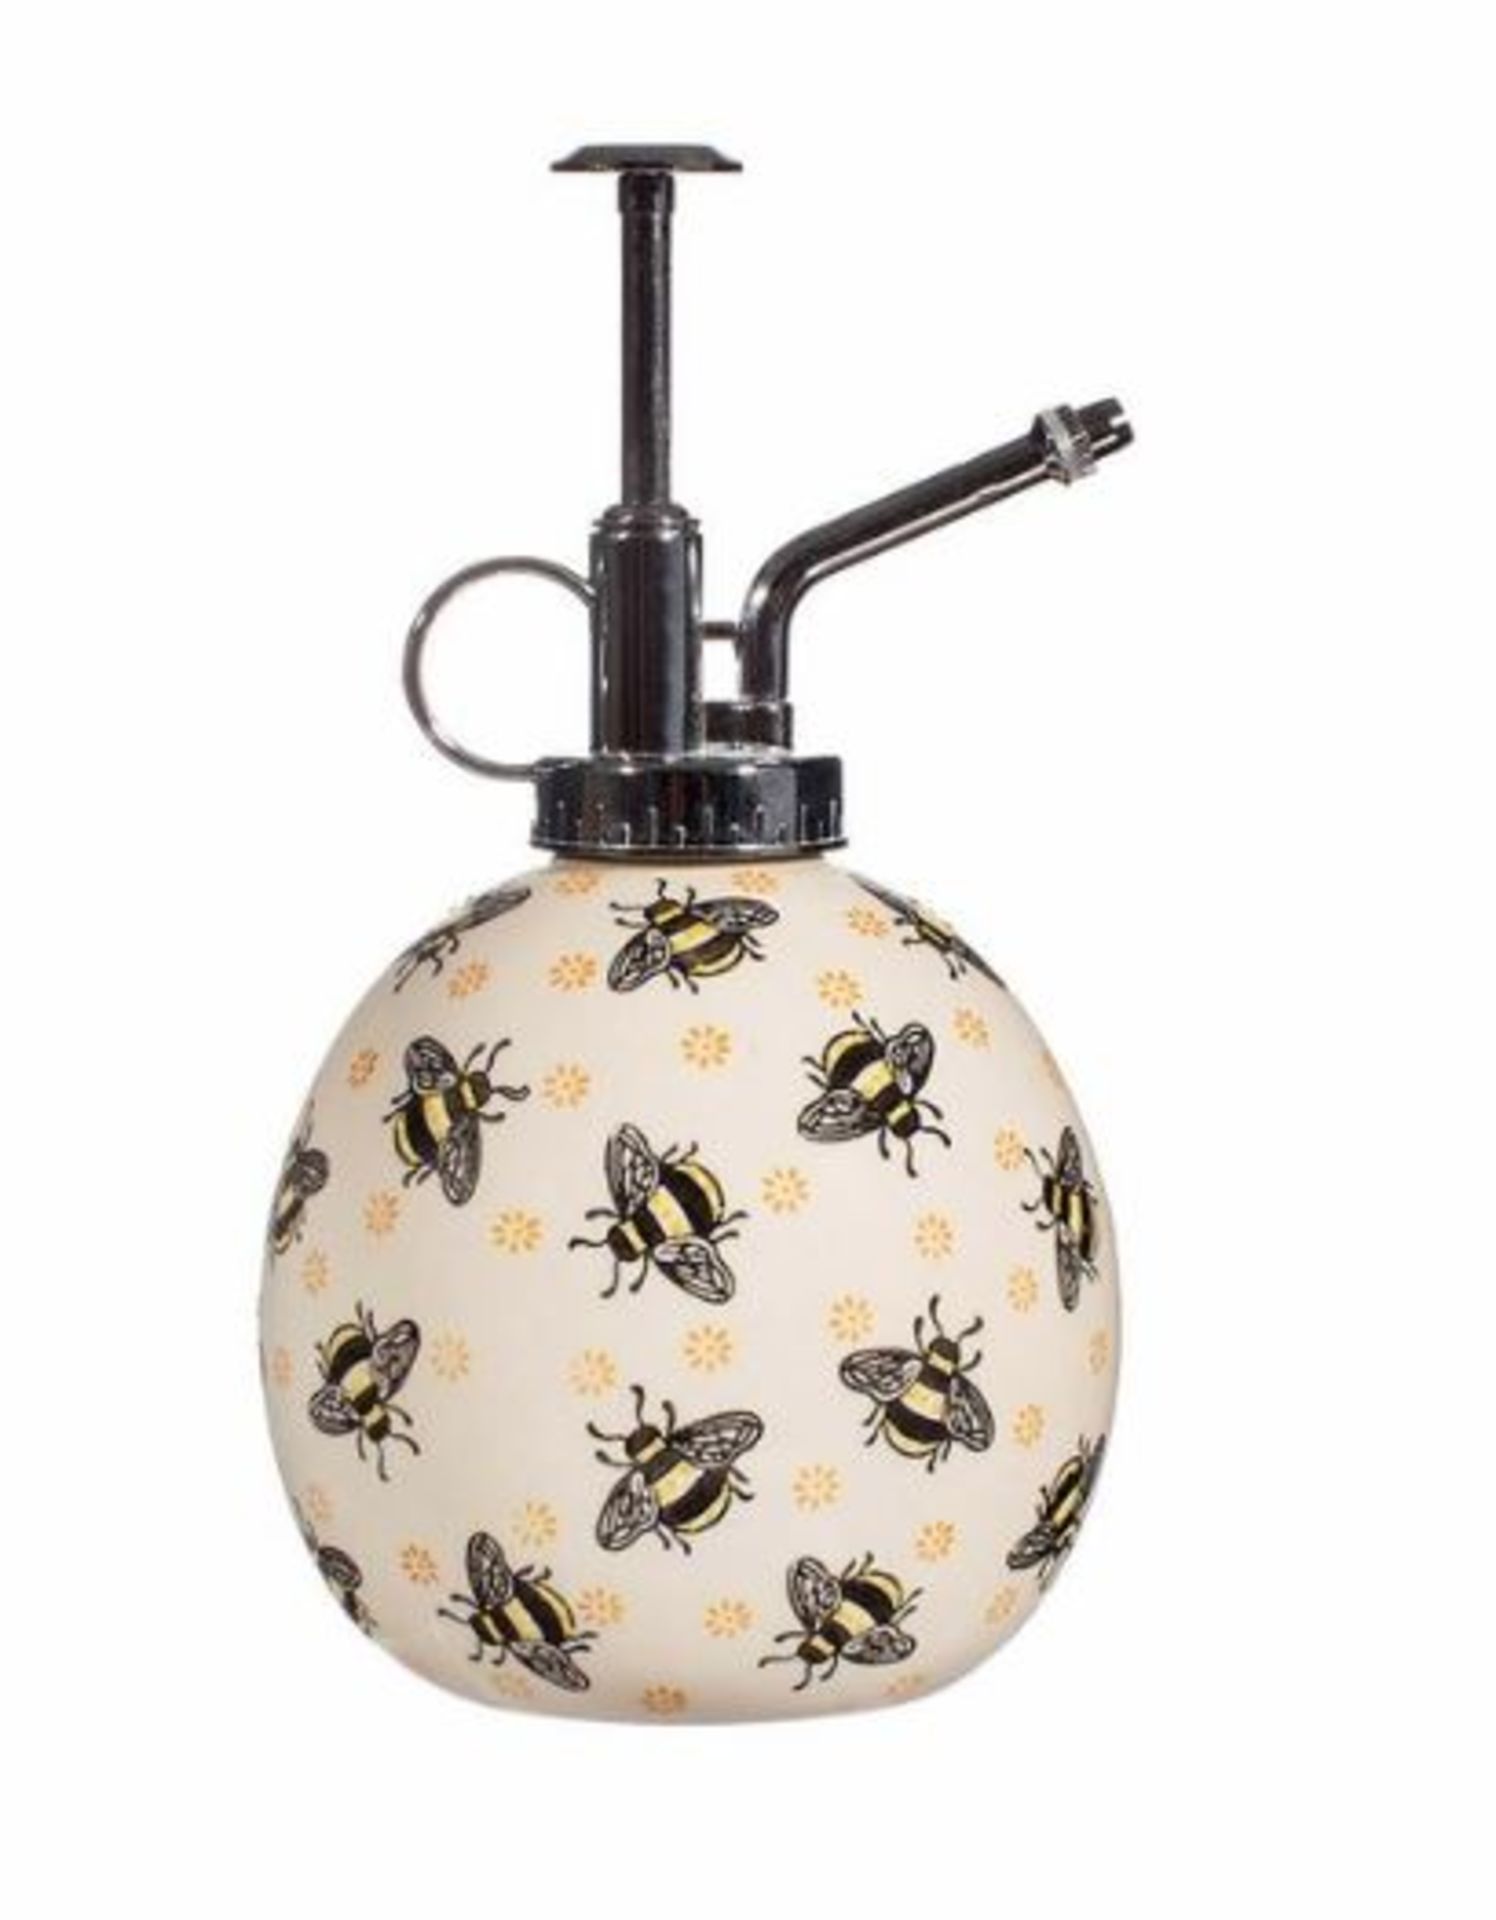 NEW SASS & BELLE BUSY BEE CERAMIC MISTER